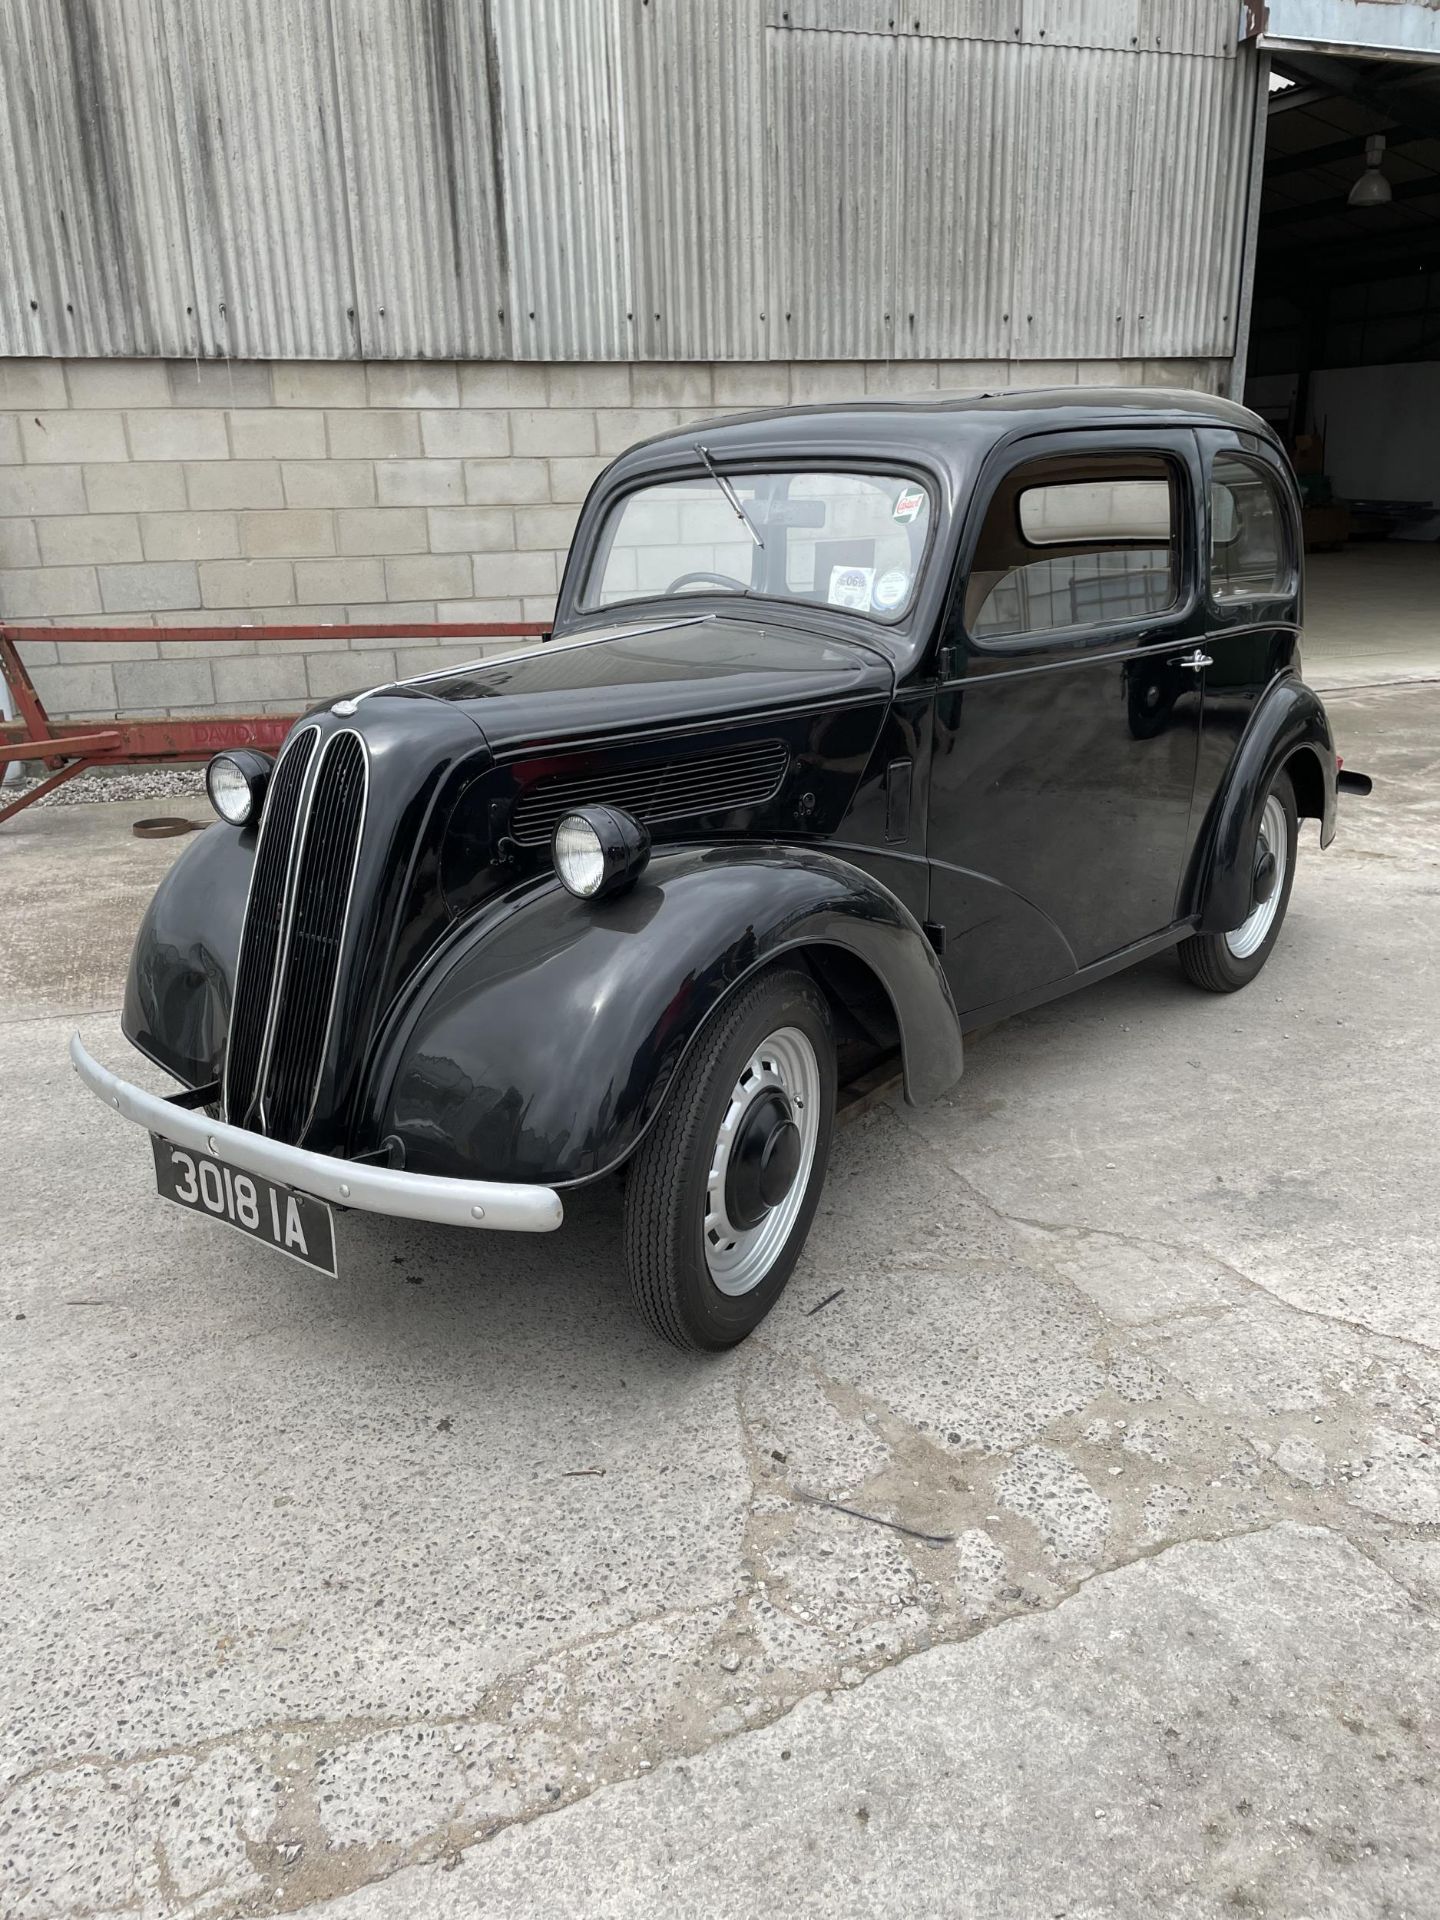 A FORD POPULAR MOTOR CAR, REGISTRATION 3018 IA, ON A V5C, IN VERY GOOD CONDITION, STARTS AND